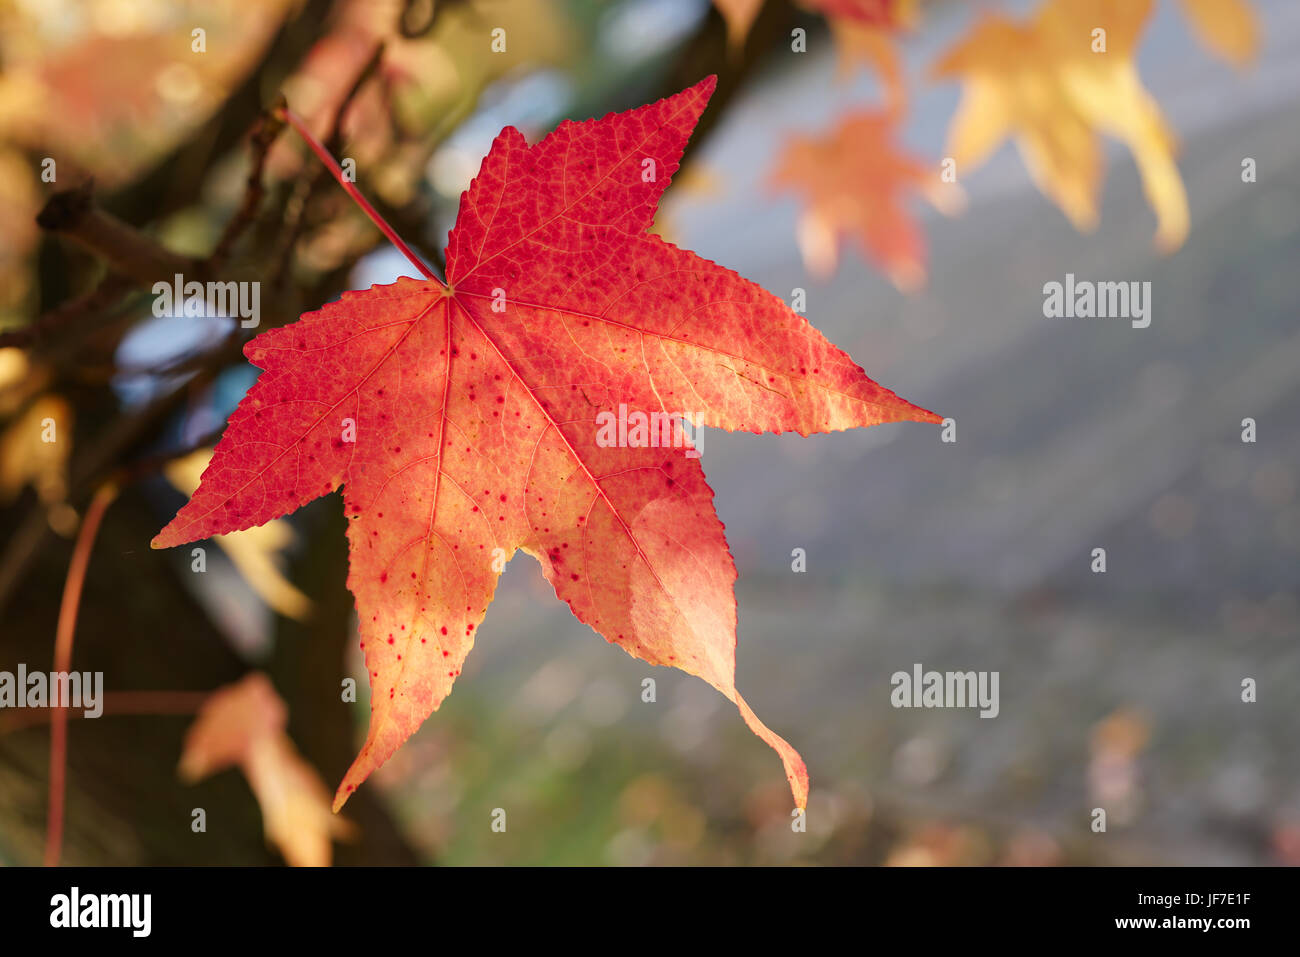 Maple leaf with autumn coloring in a park Stock Photo